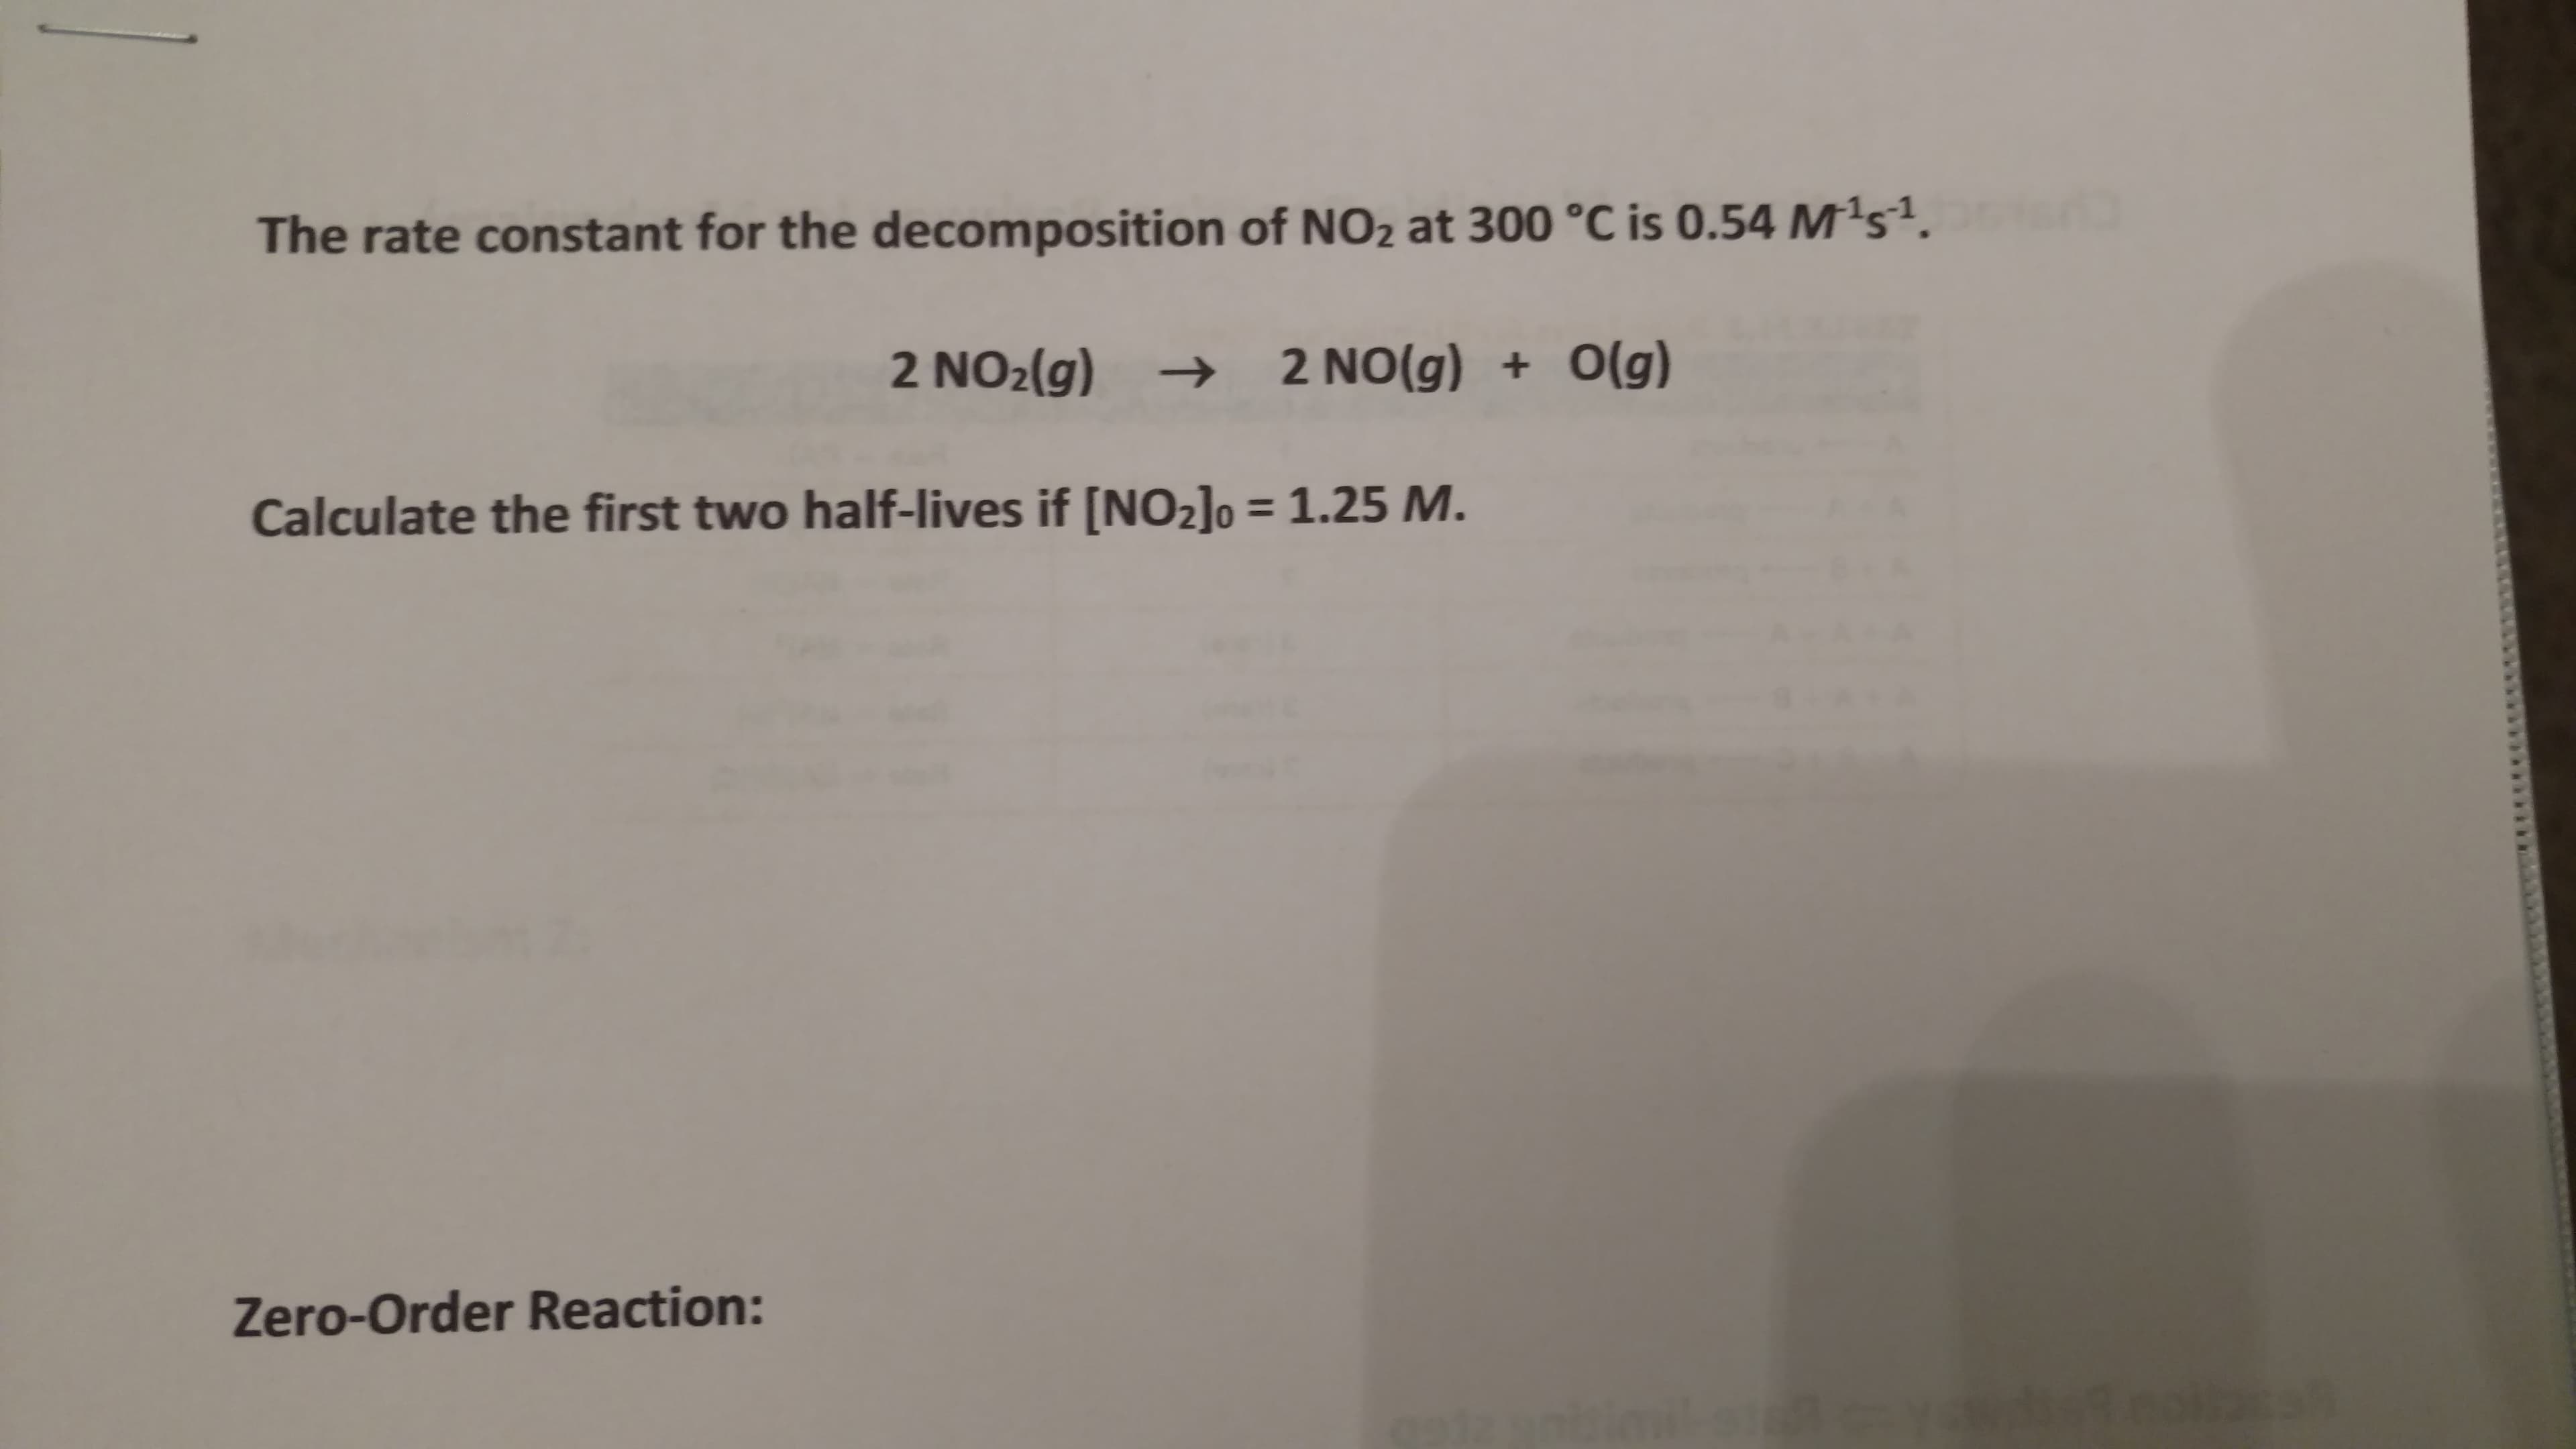 The rate constant for the decomposition of NO2 at 300 °C is 0.54 M1s1.
2 NO2(g)2 NO(g)O(g)
Calculate the first two half-lives if [NO2lo 1.25 M
Zero-Order Reaction:
